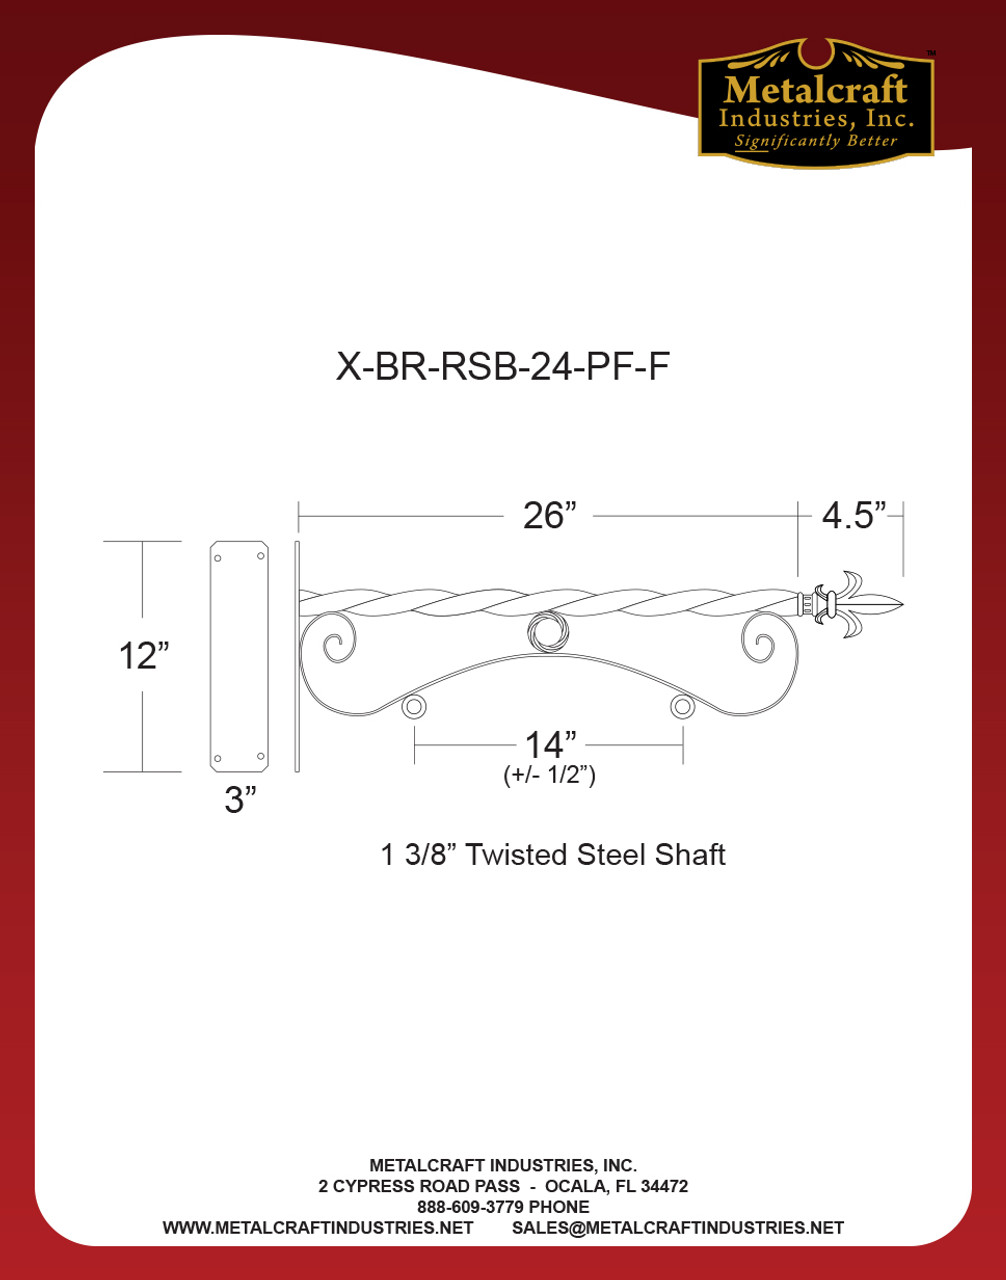 Specification drawing for item# X-BR-RSB-24-PF-F